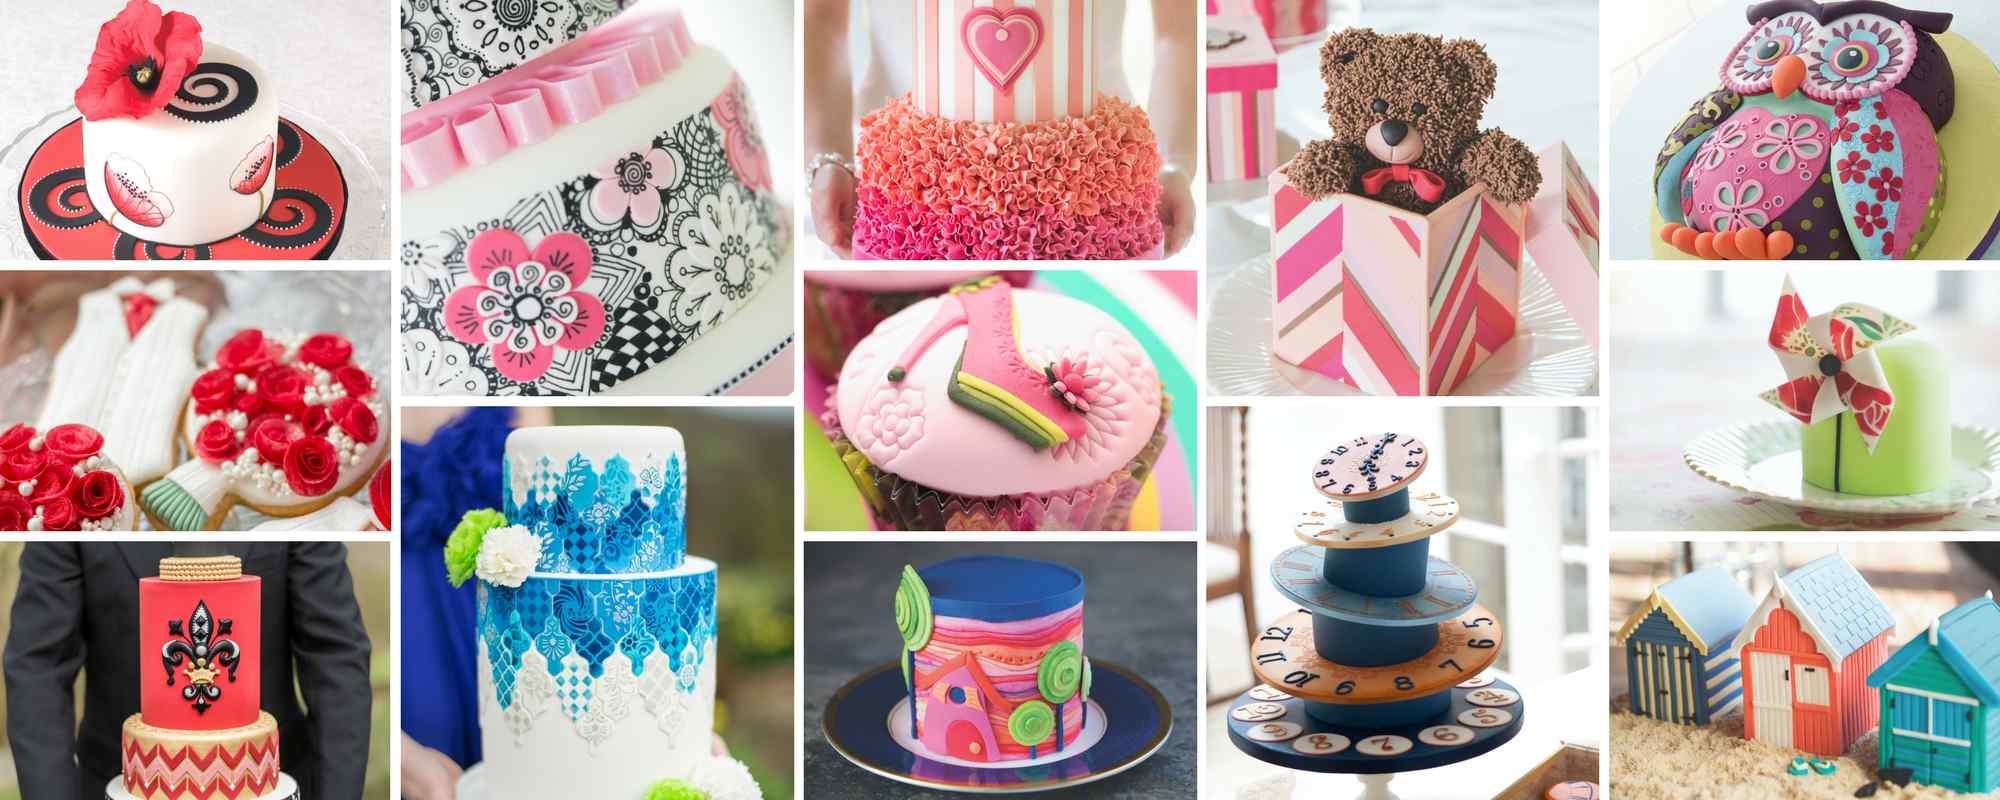 Cakes from a variety of Lindy Smith Cake Decorating Books